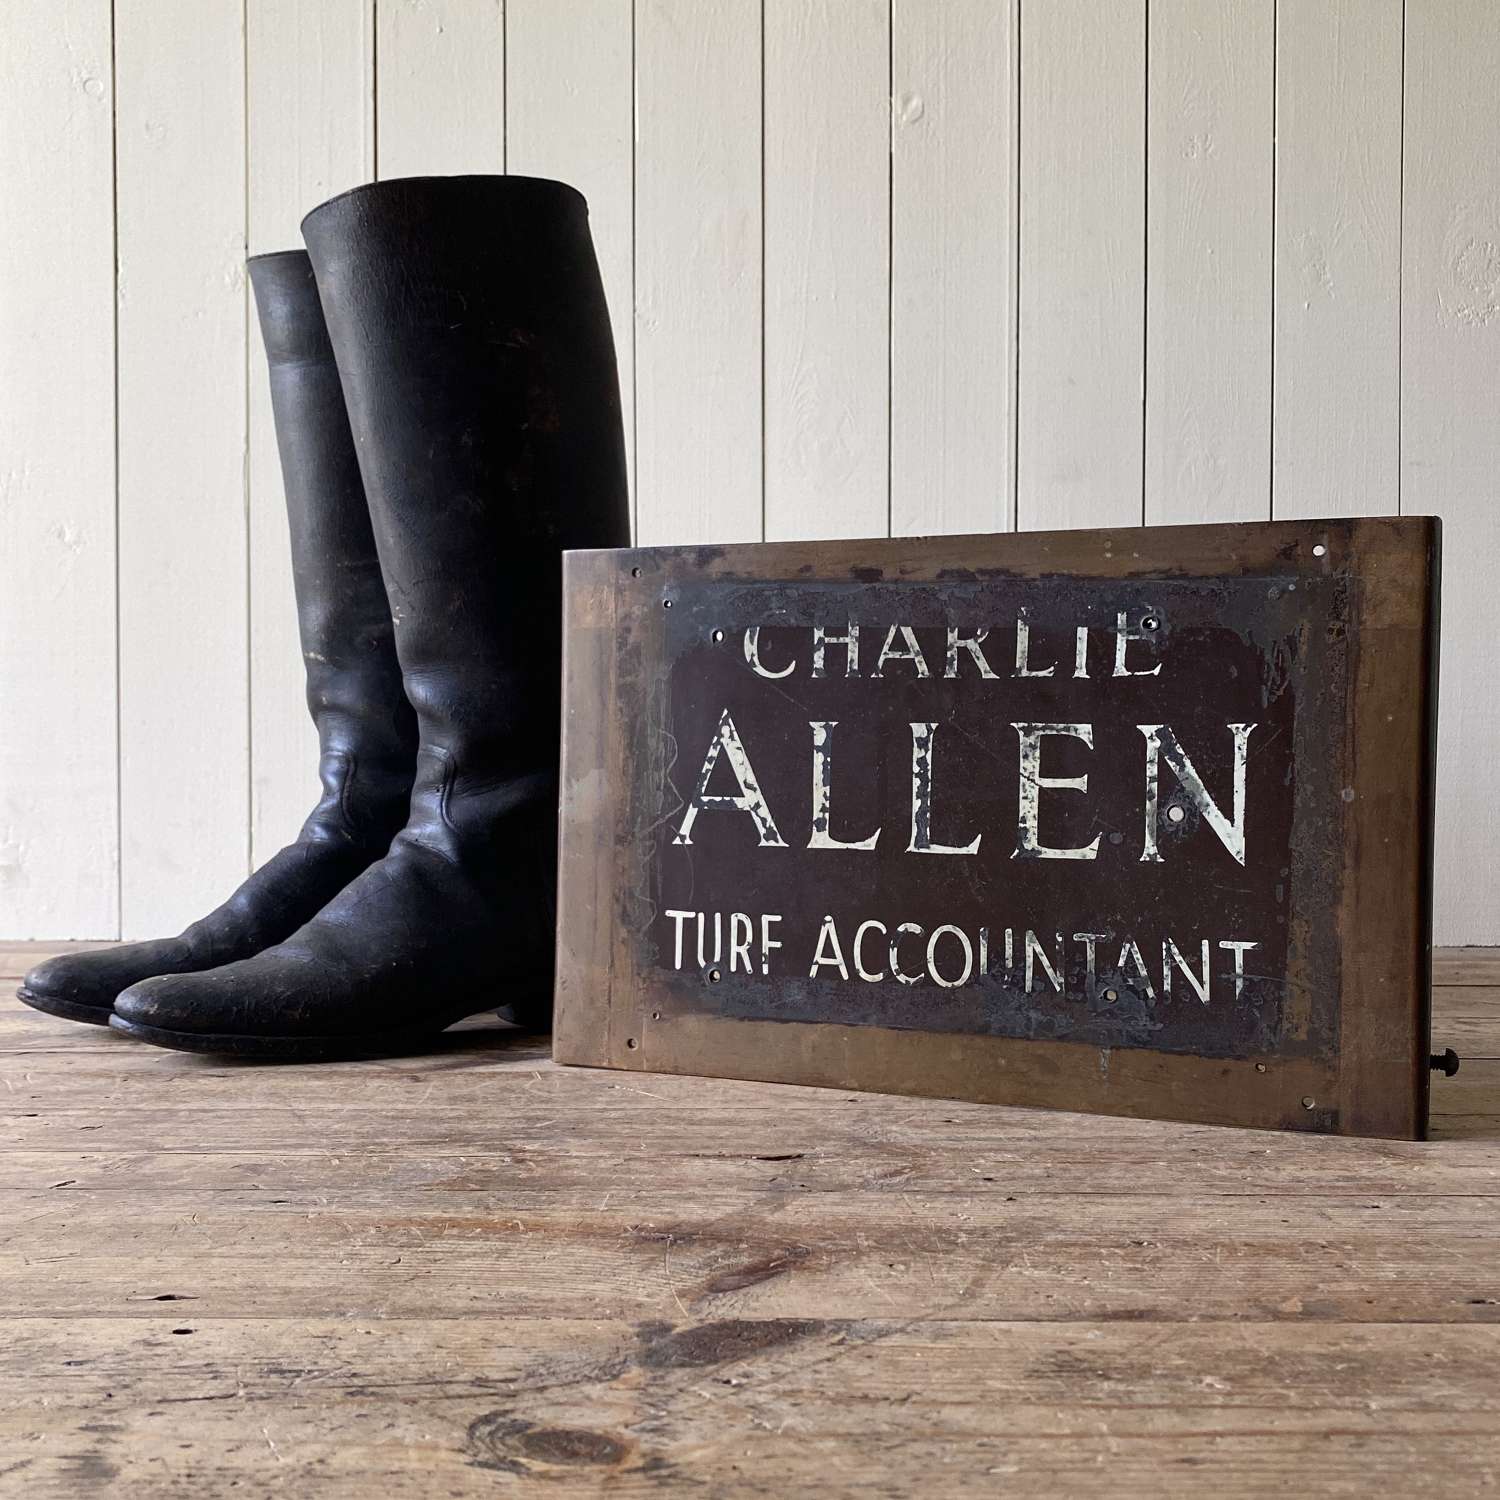 Bookmakers/Turf accountant sign - Charlie Allen